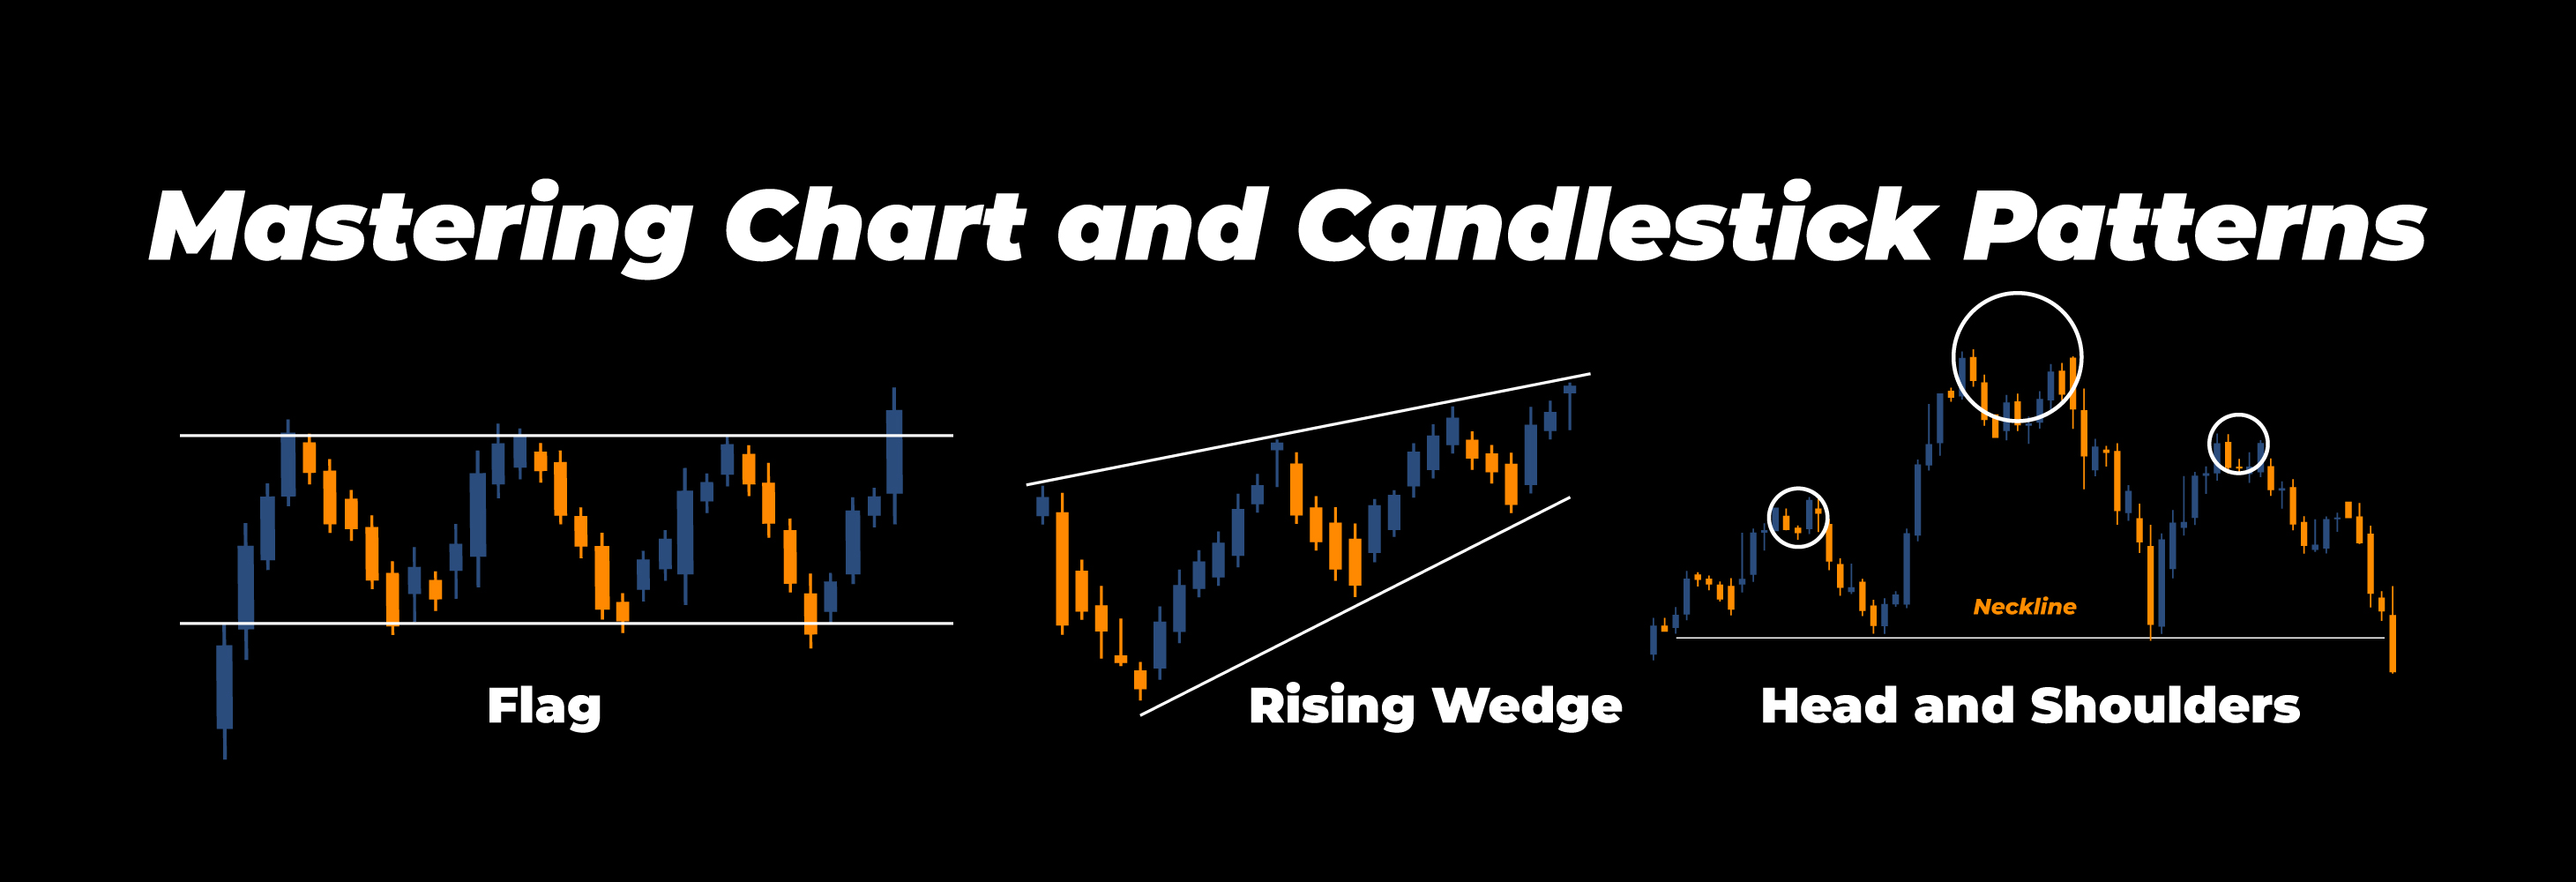 Mastering Chart And Candlestick Patterns